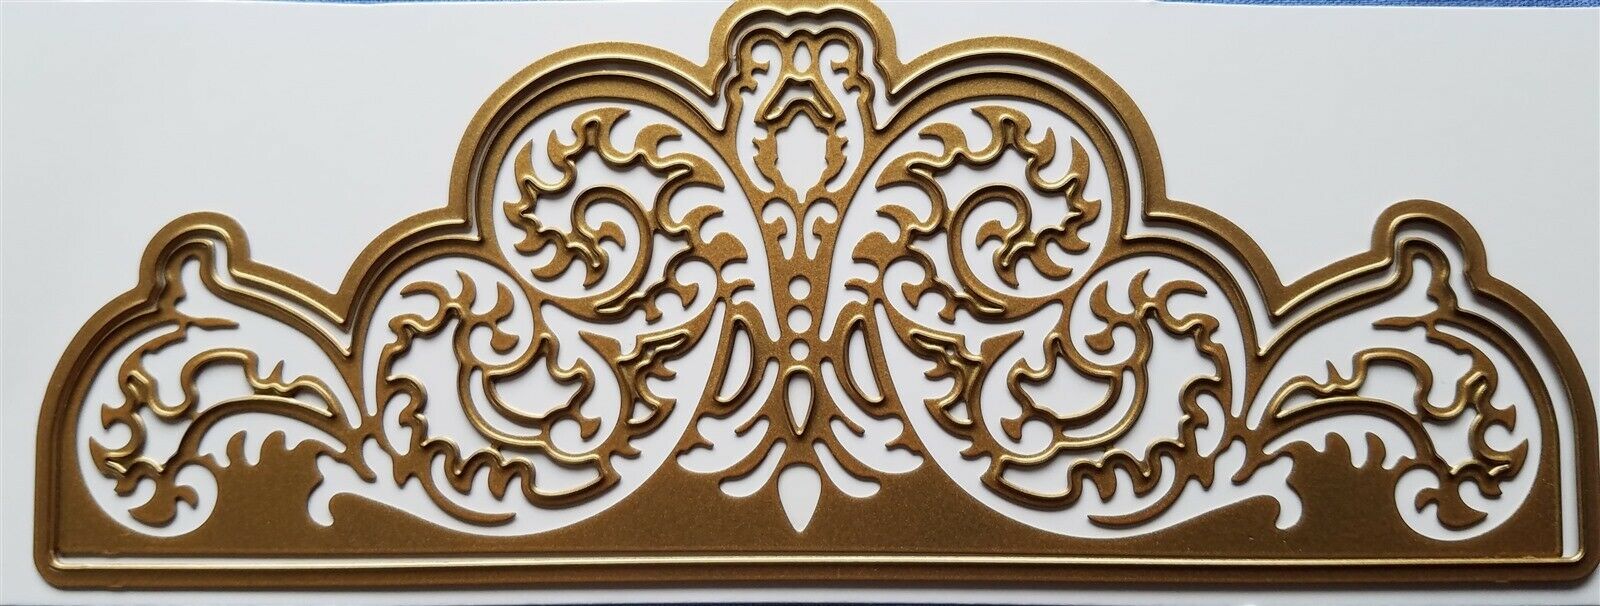 Anna Griffin Radial Border Die Cut and Emboss Ornate